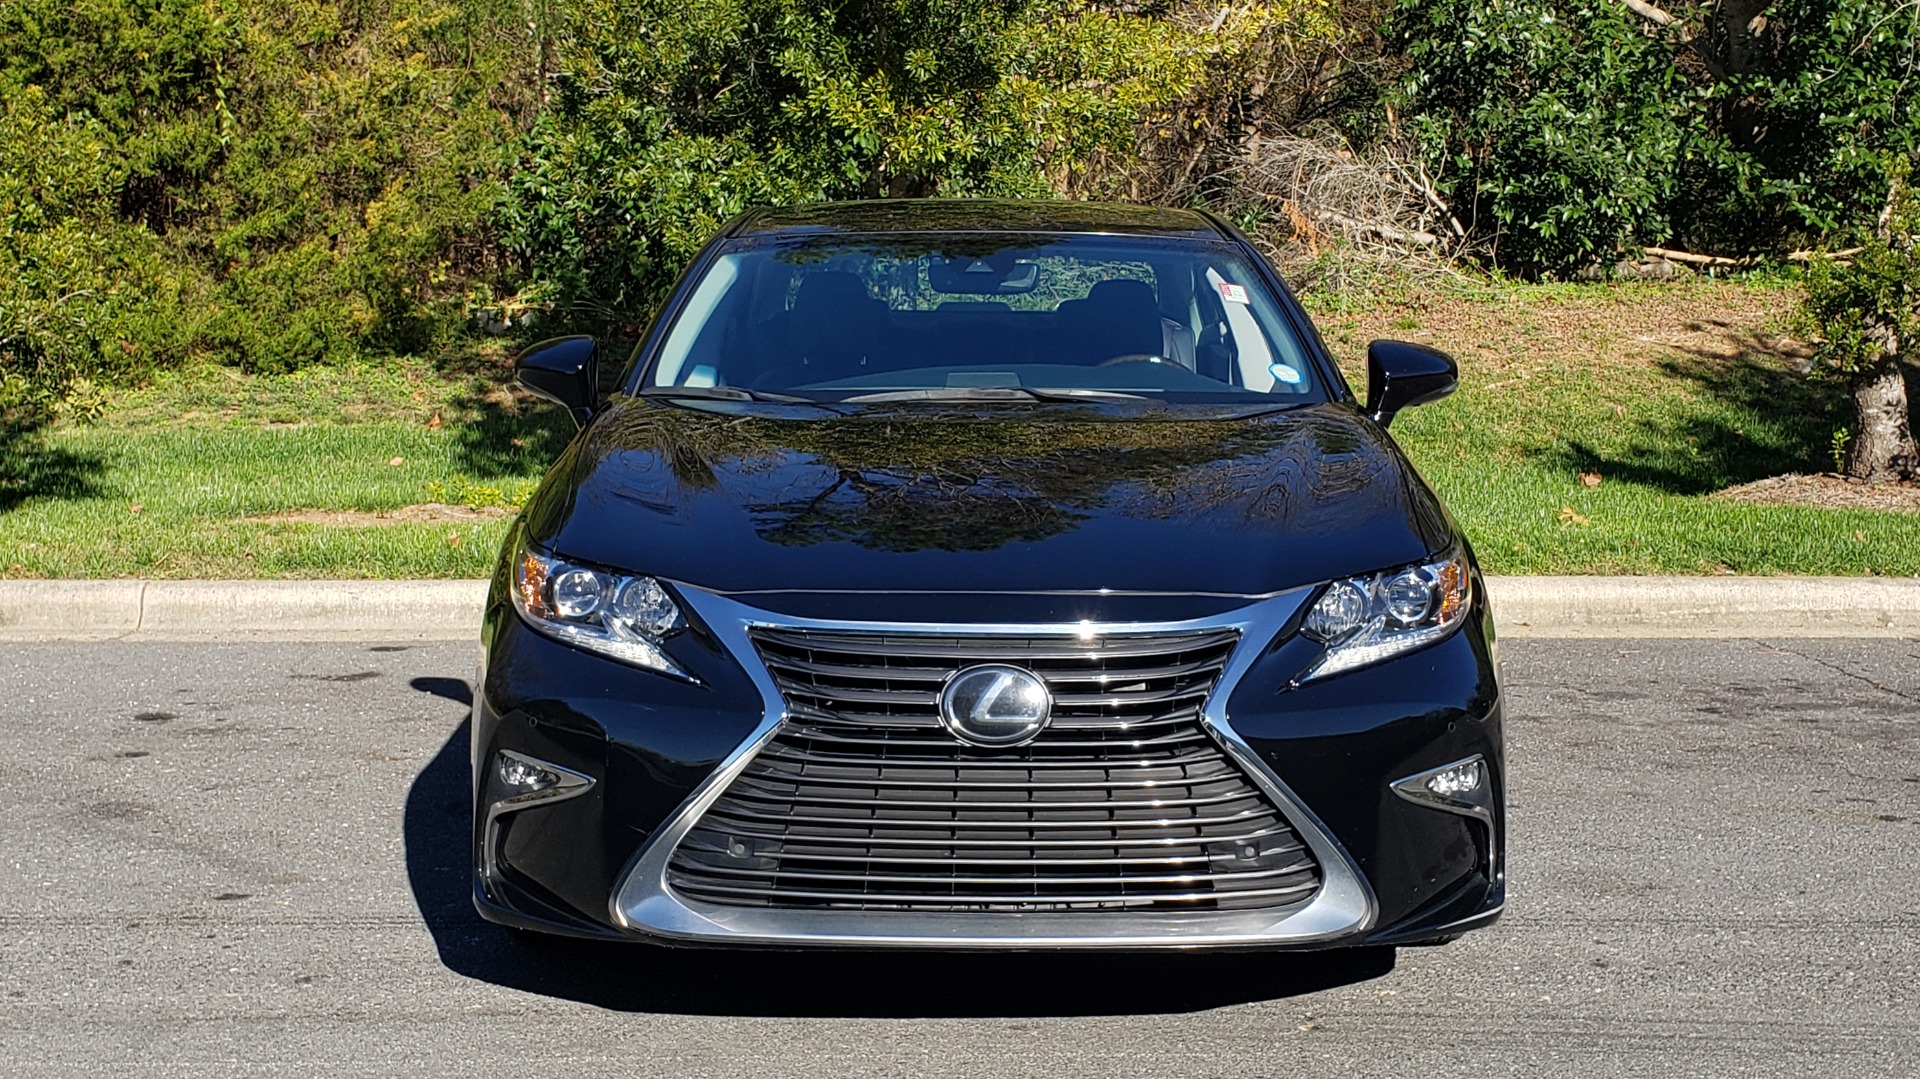 Used 2017 Lexus ES 350 PREMIUM / NAV / SUNROOF / BSM / VENT STS / REARVIEW for sale Sold at Formula Imports in Charlotte NC 28227 14